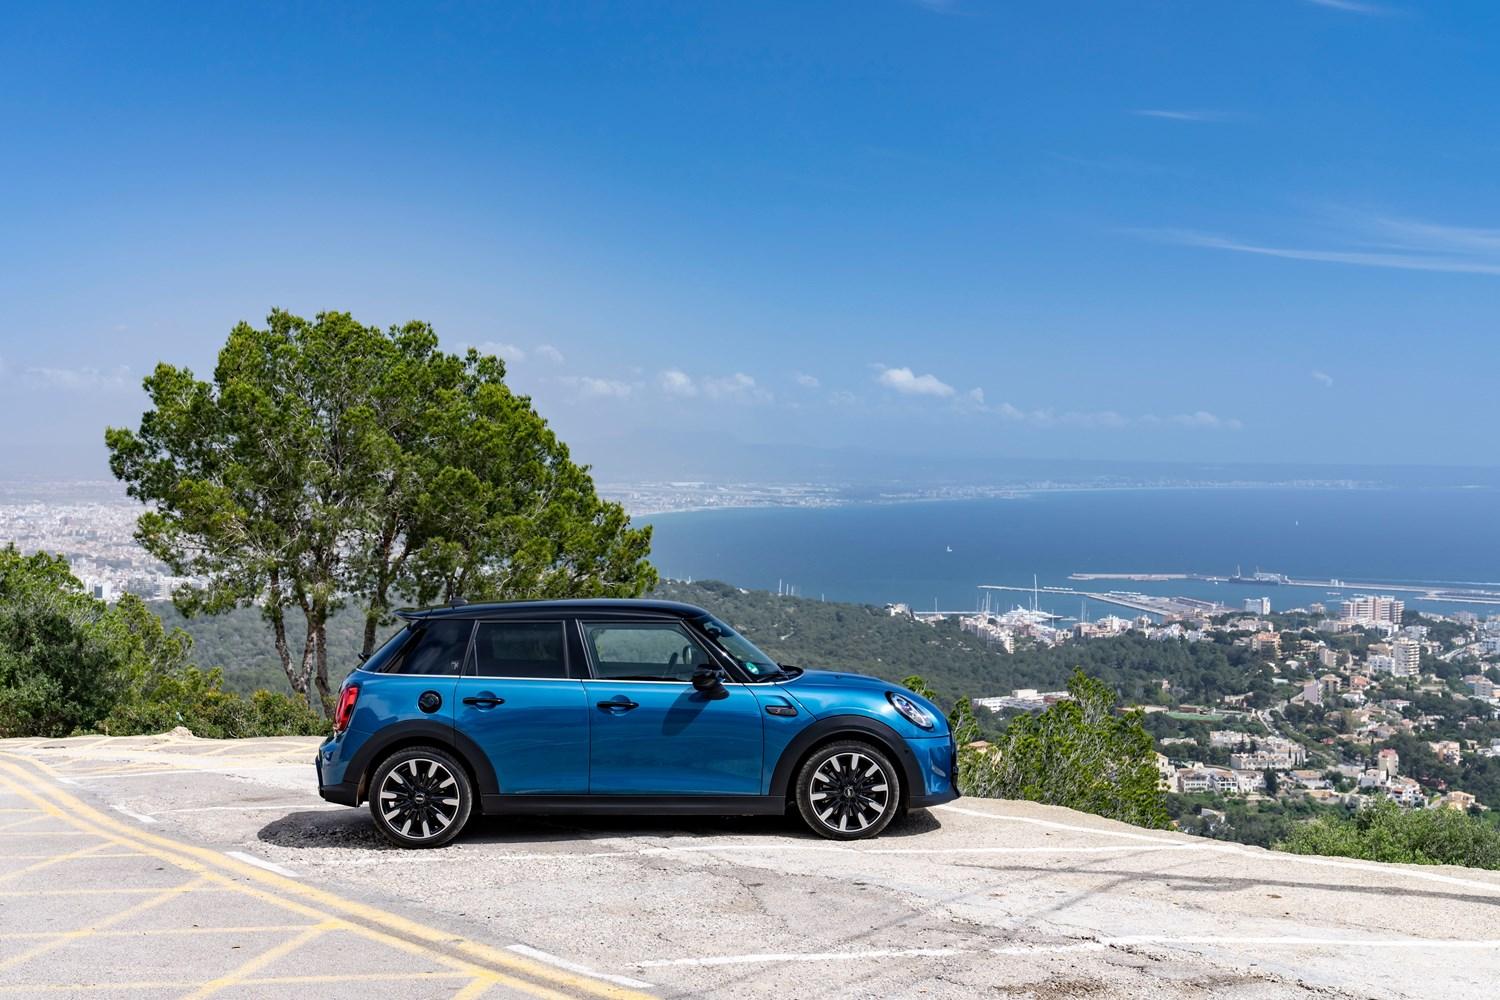 Side view of the new MINI 5-Door Hatchback in blue, parked in a car park overlooking Mediterranean city and sea